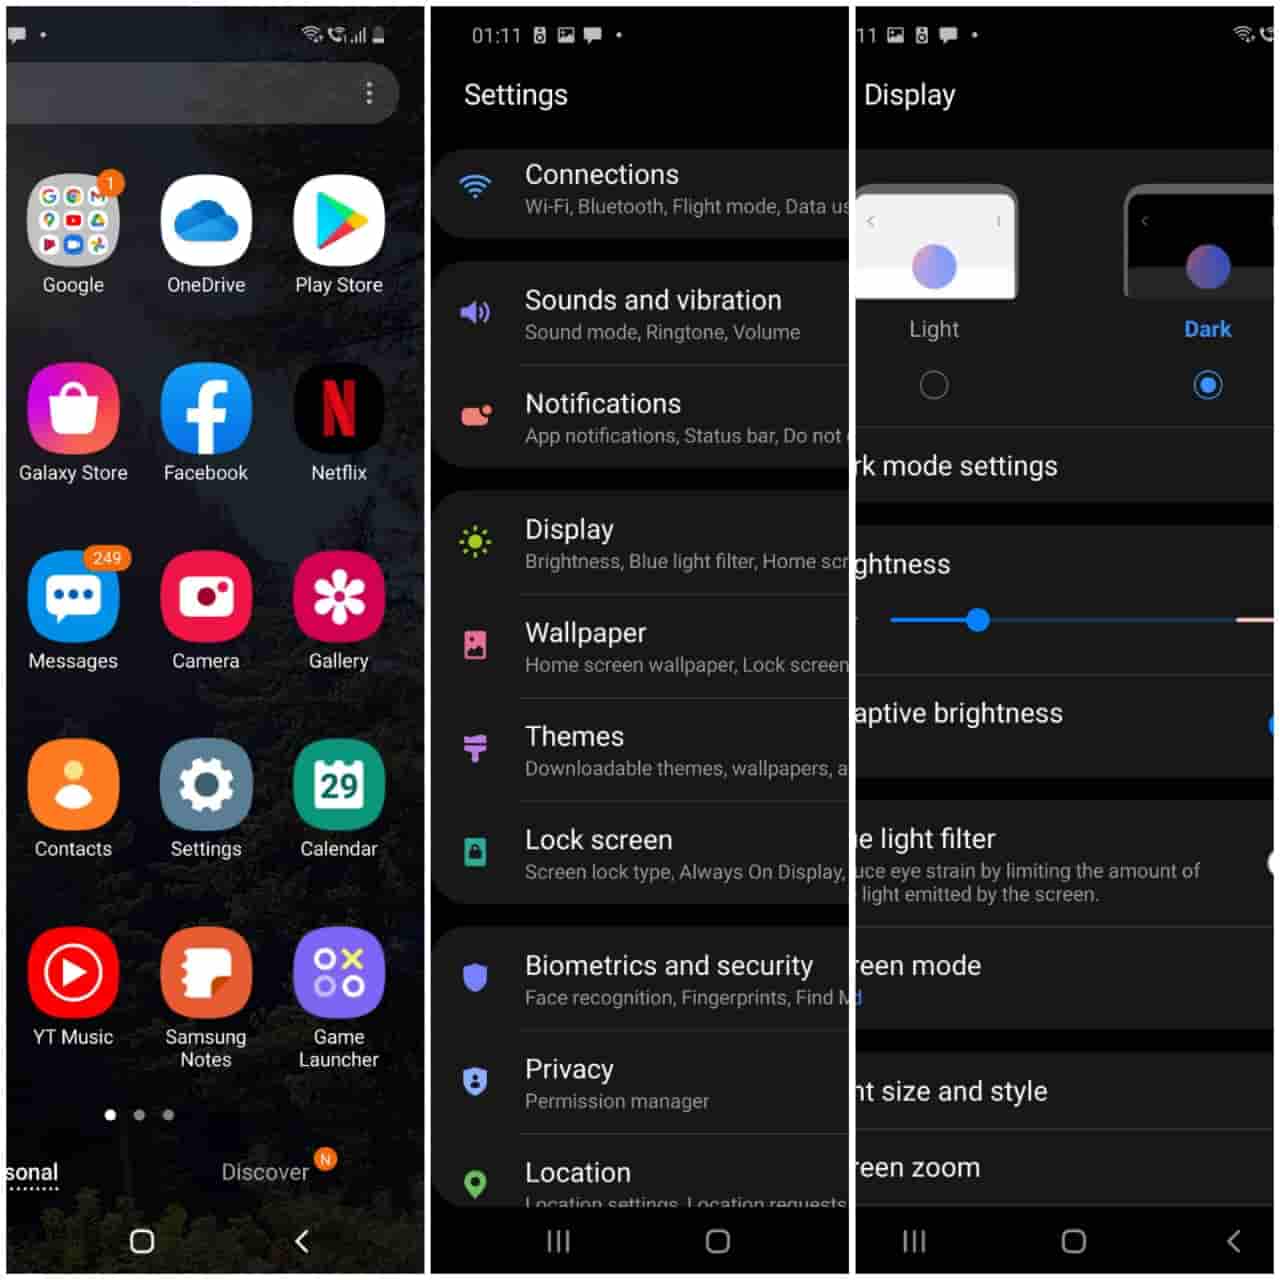 Dark Mode In Android 10 & later